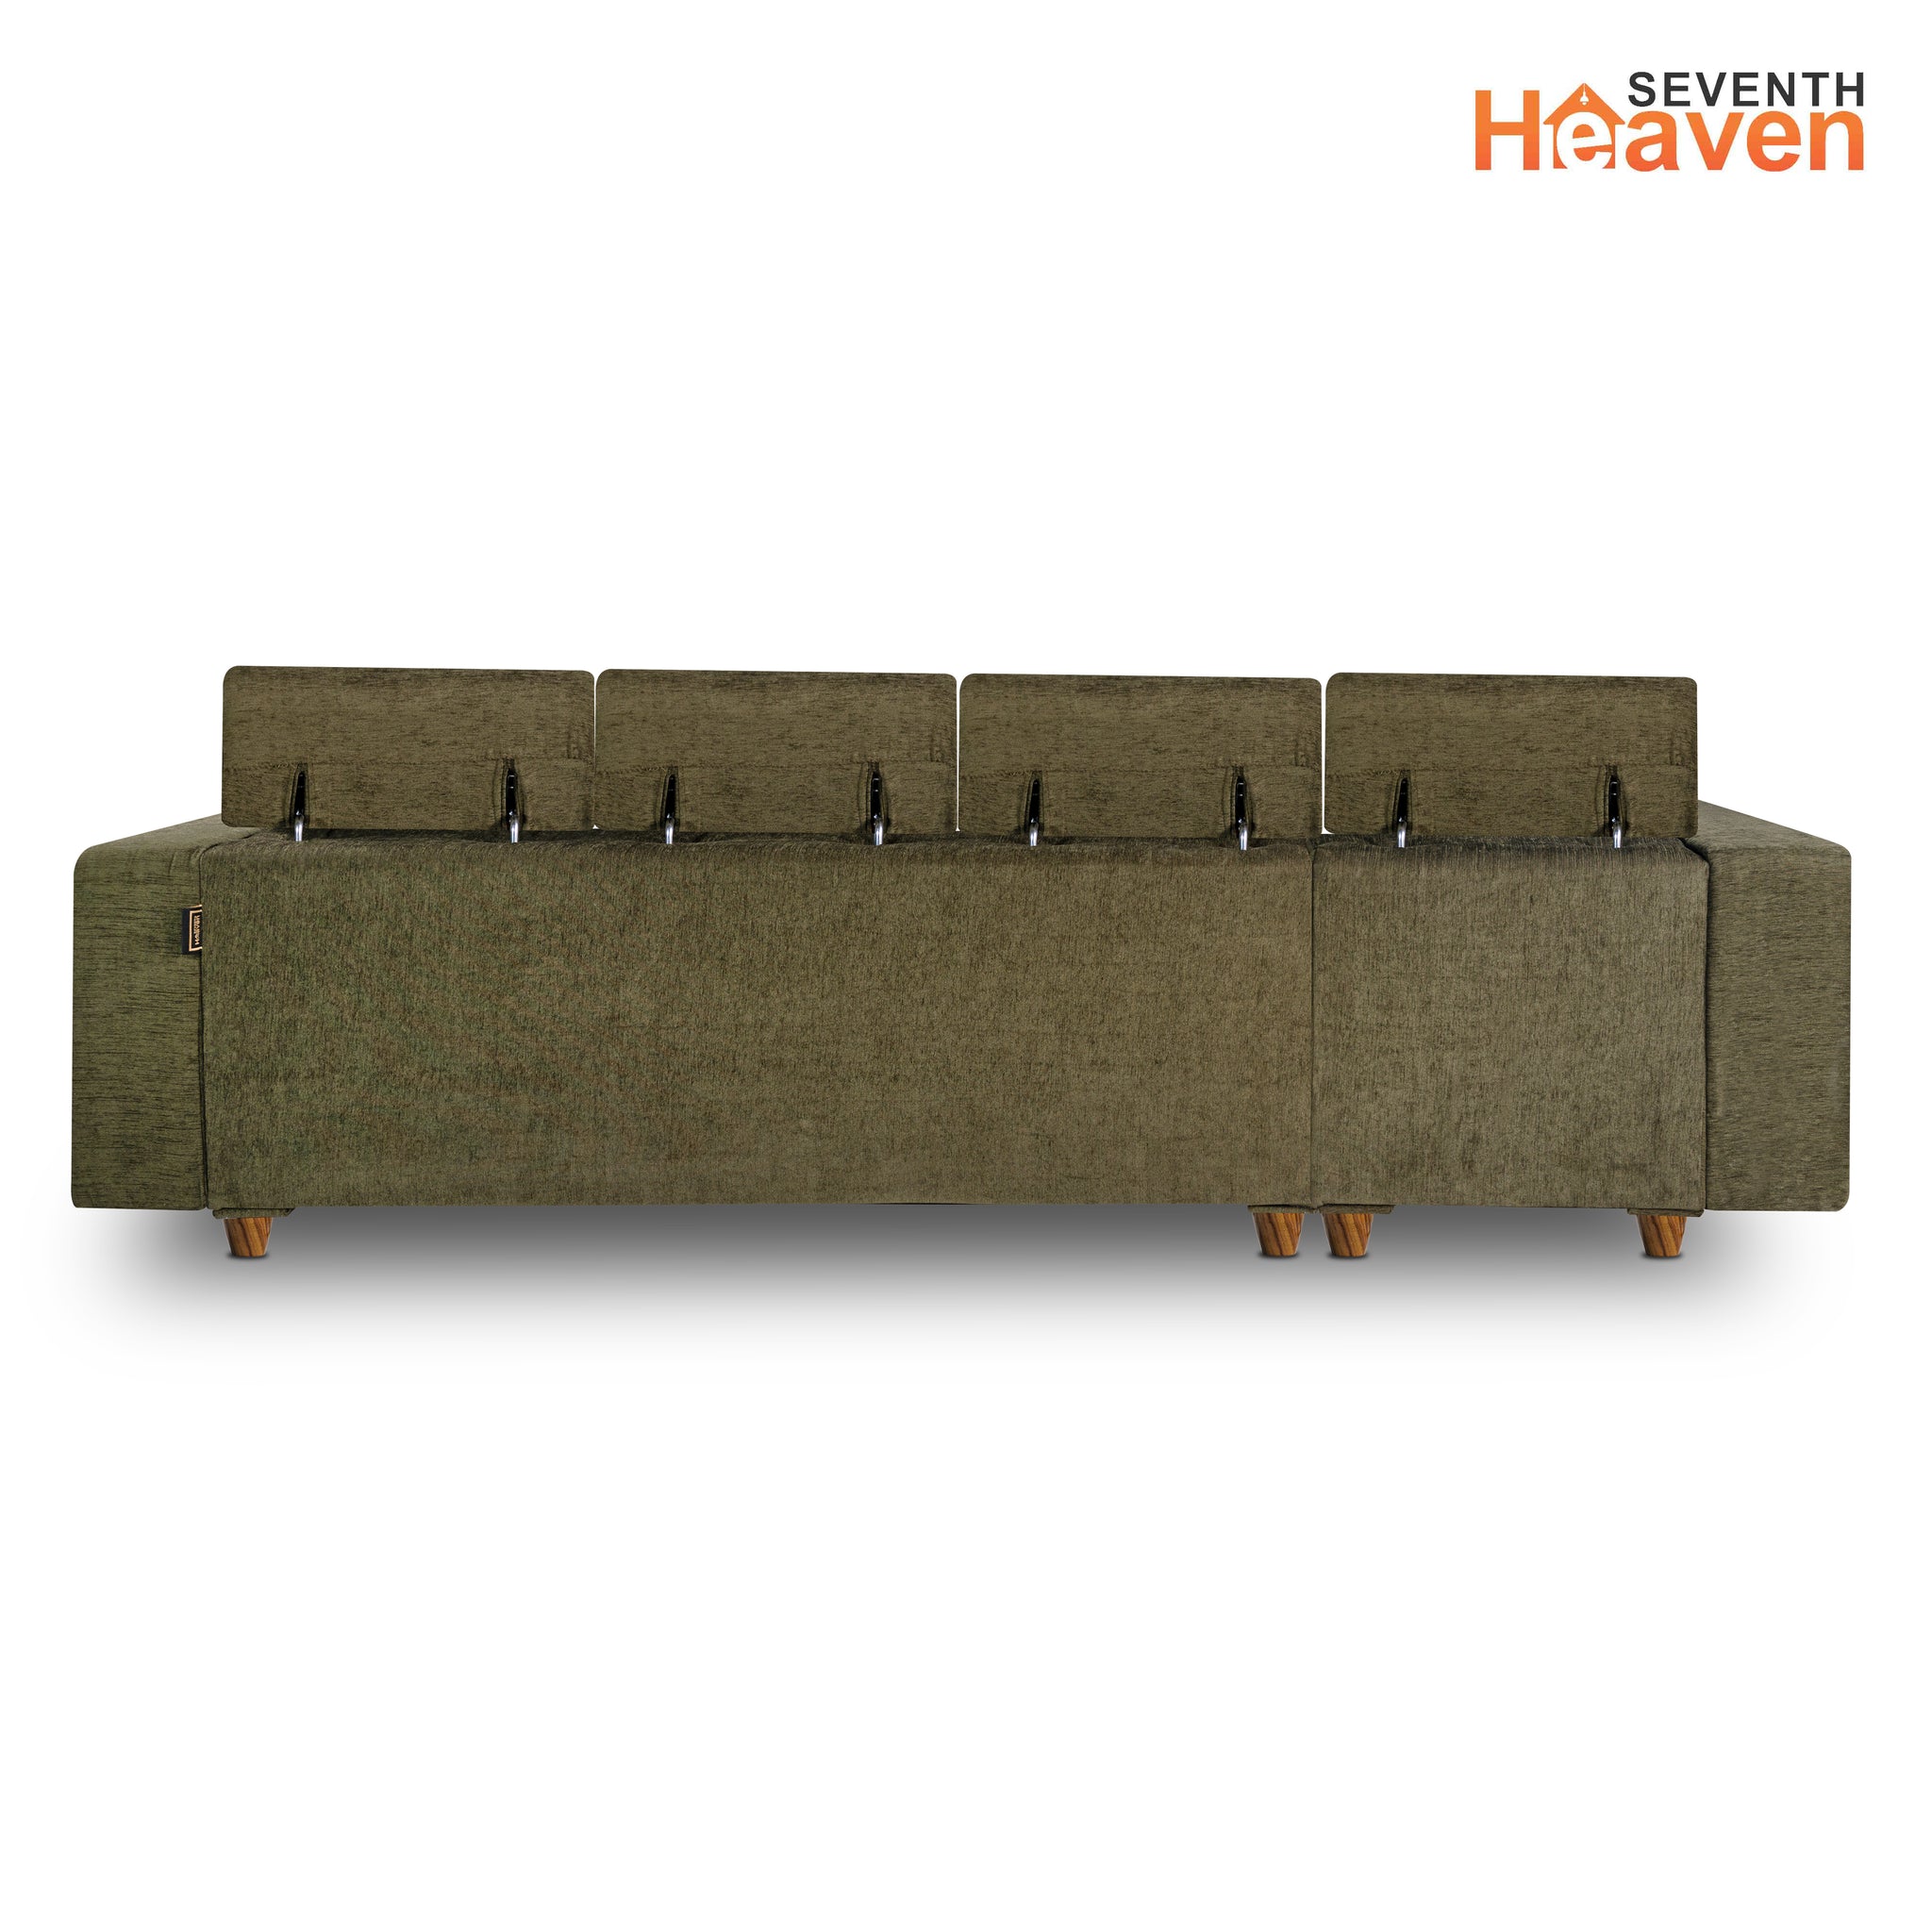 Berlin 6 Seater Sofa, Extra Spacious, Chenille Molfino Fabric with 3 Years Warranty( Finish Color - Green, Style - Left Corner Sofa)